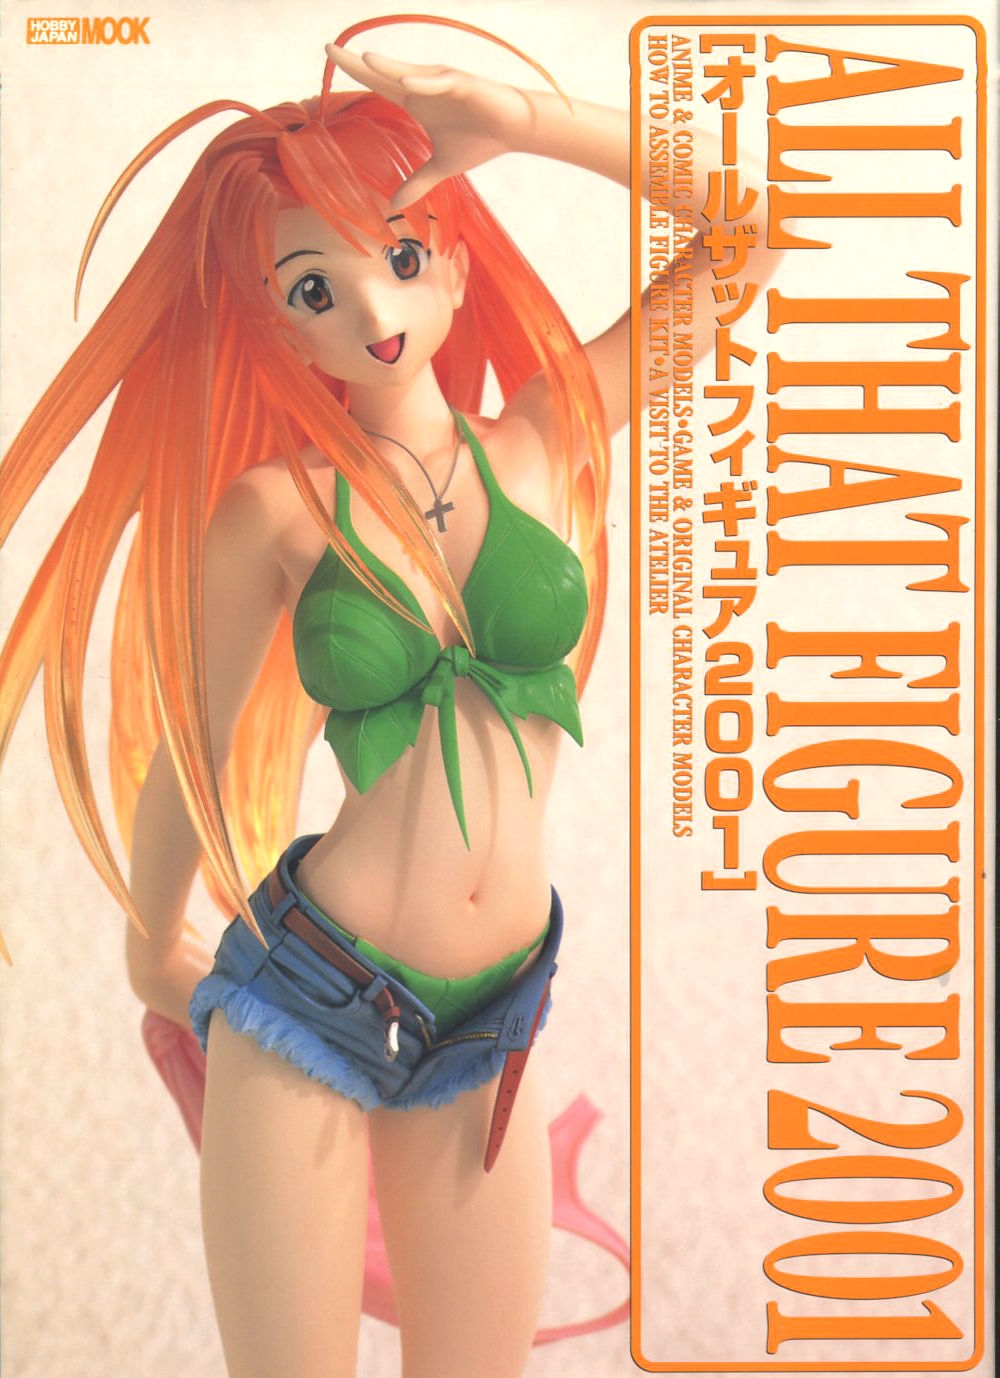 Hobby Japan Mook All That Figure 2001 0